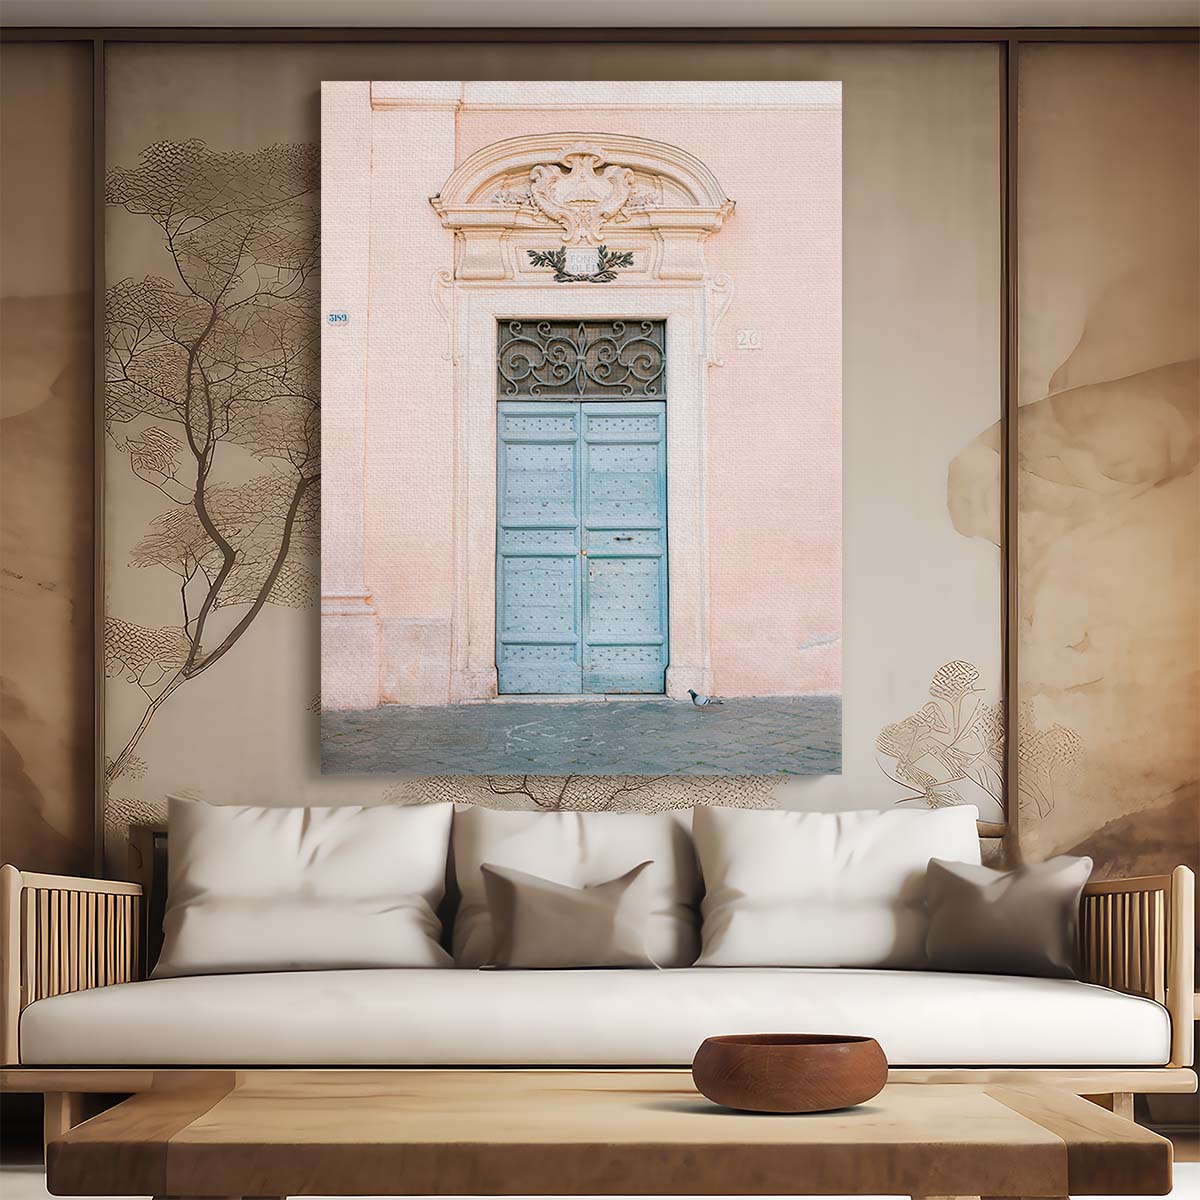 Old Ornate Door Architecture Photography, Rome Italy Wall Art by Luxuriance Designs, made in USA